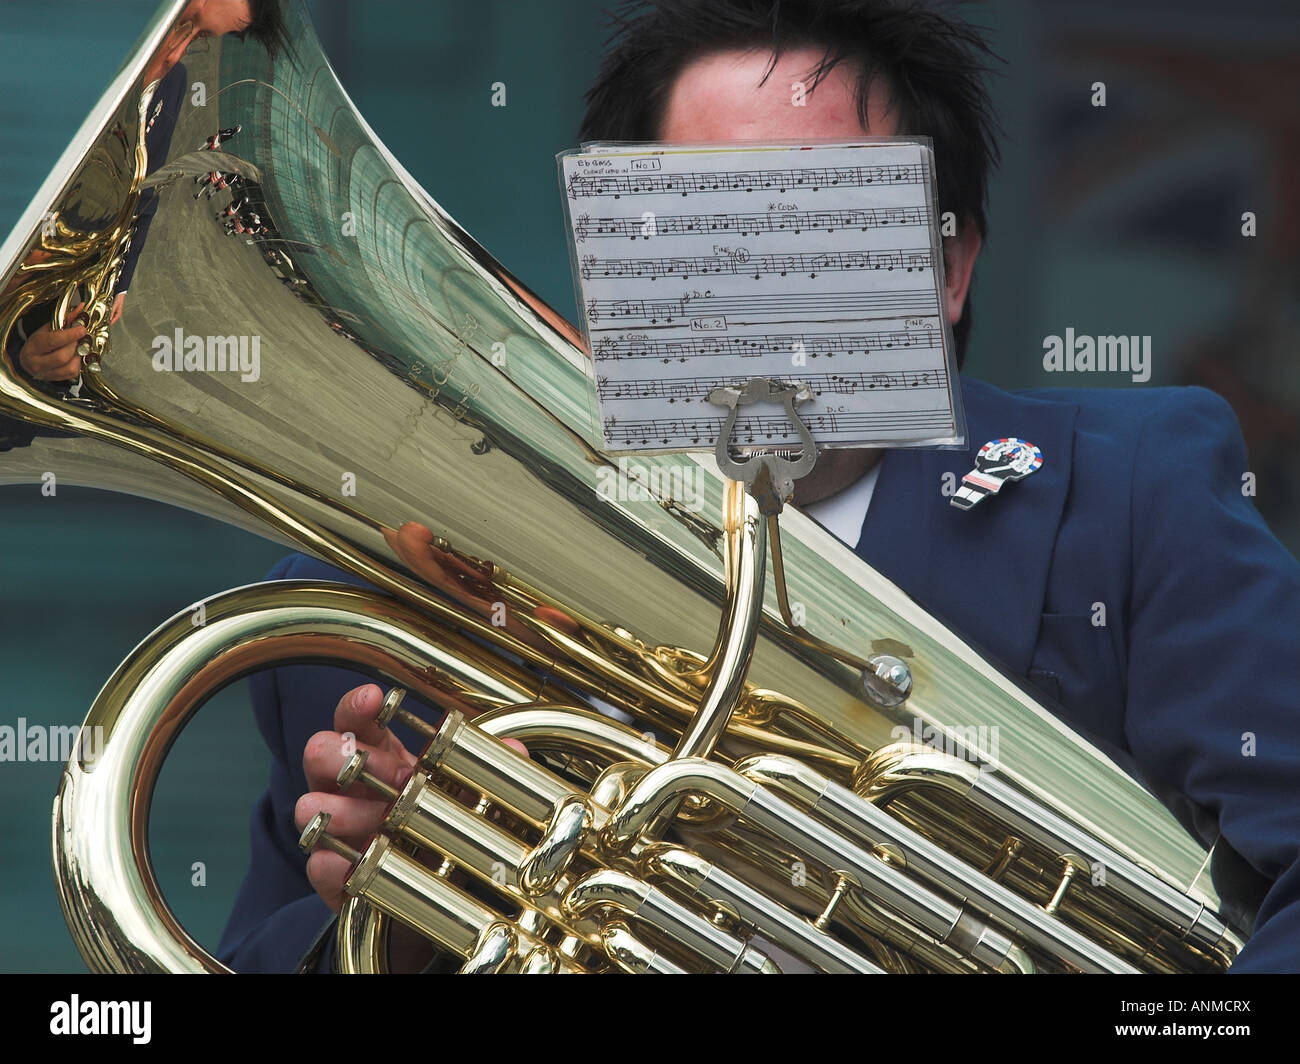 Tuba player player in brass band. Player and buildings are reflected in the polished tuba. Face not visible. Stock Photo